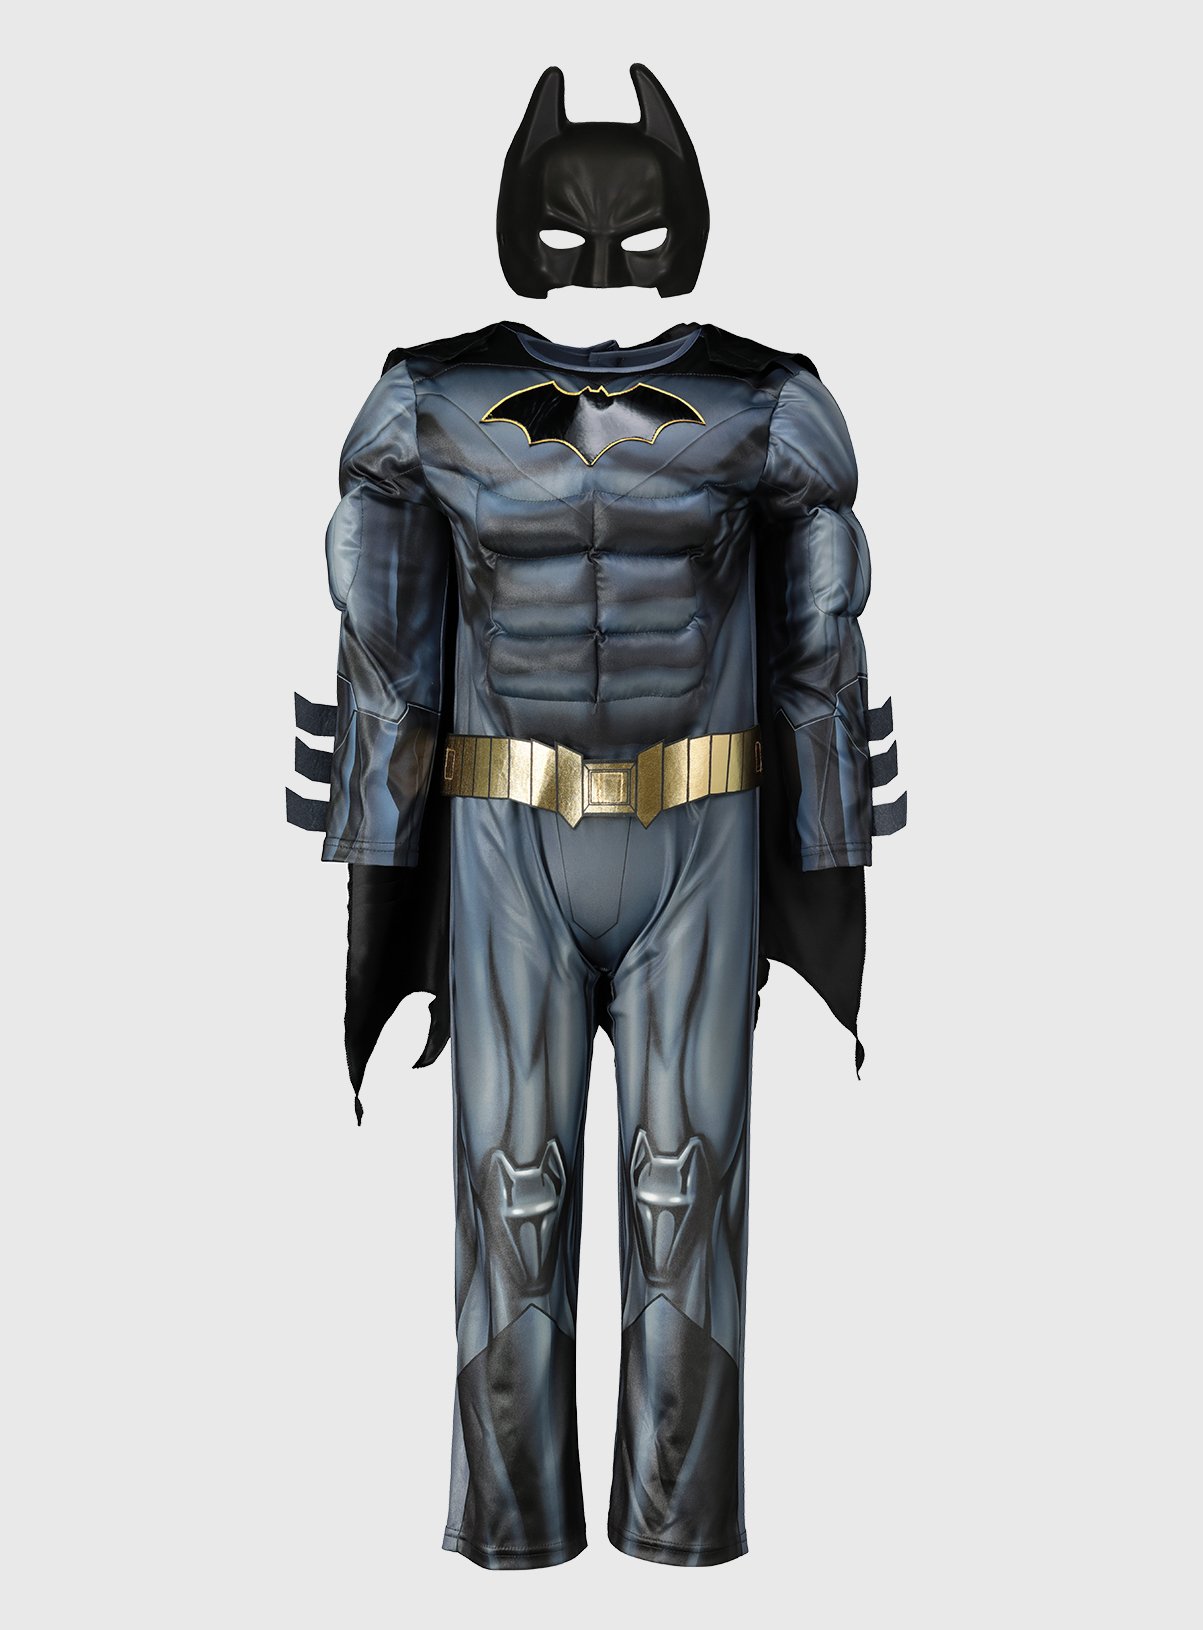 Batman Costume : 15 Steps (with Pictures) - Instructables